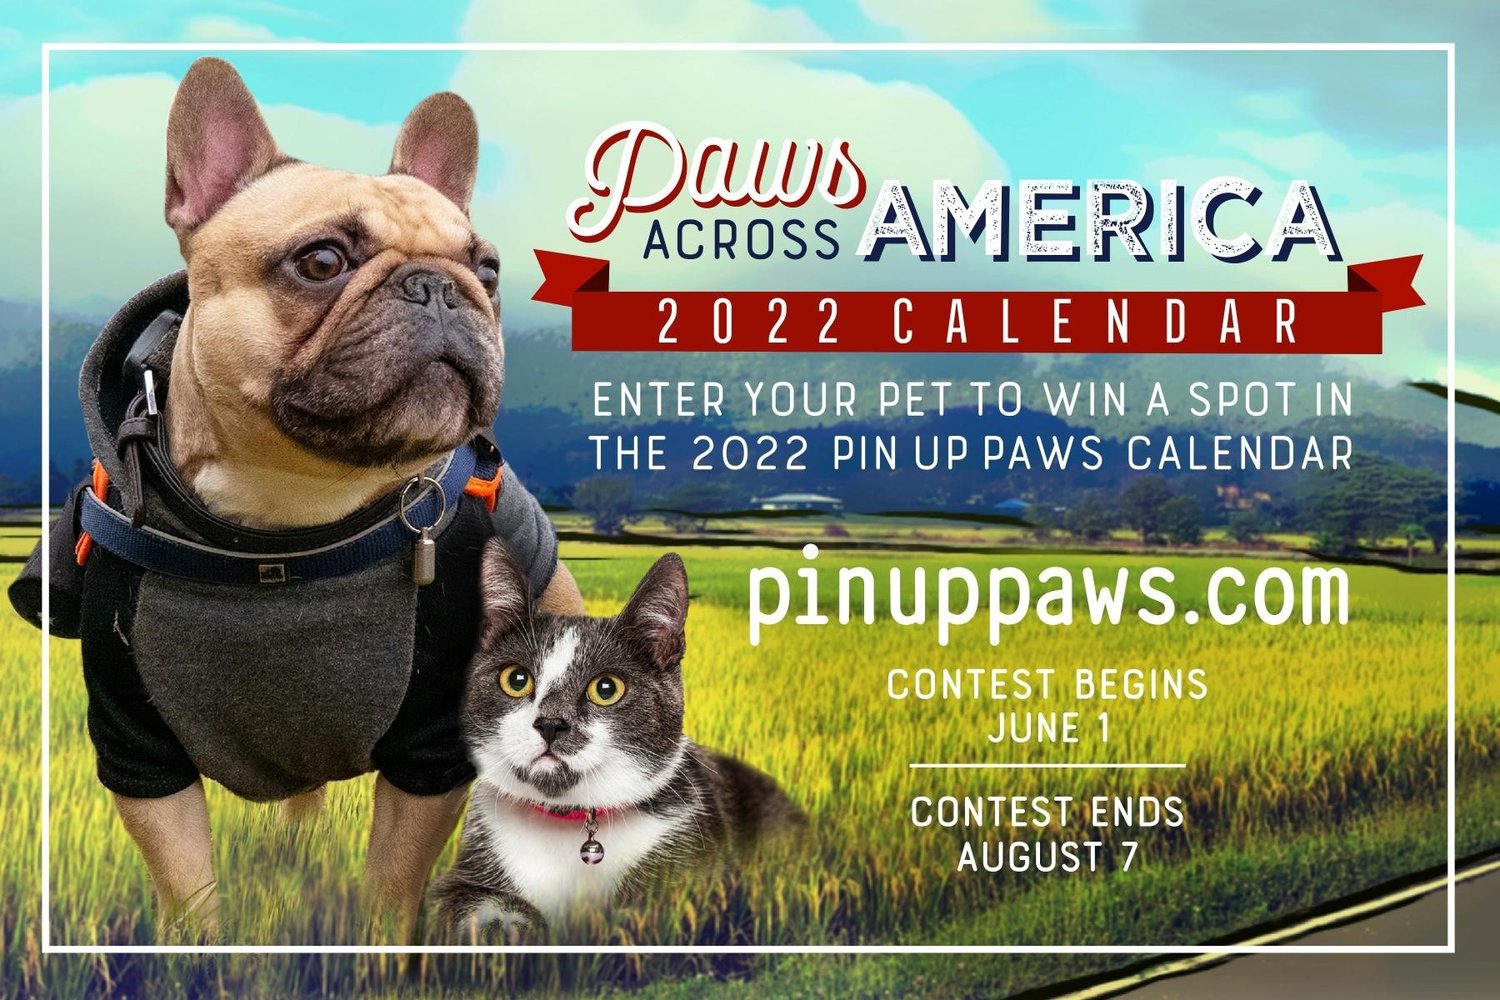 This billboard on U.S. 1 in St. Augustine promotes the St. Augustine Humane Society’s Pin Up Paws calendar.